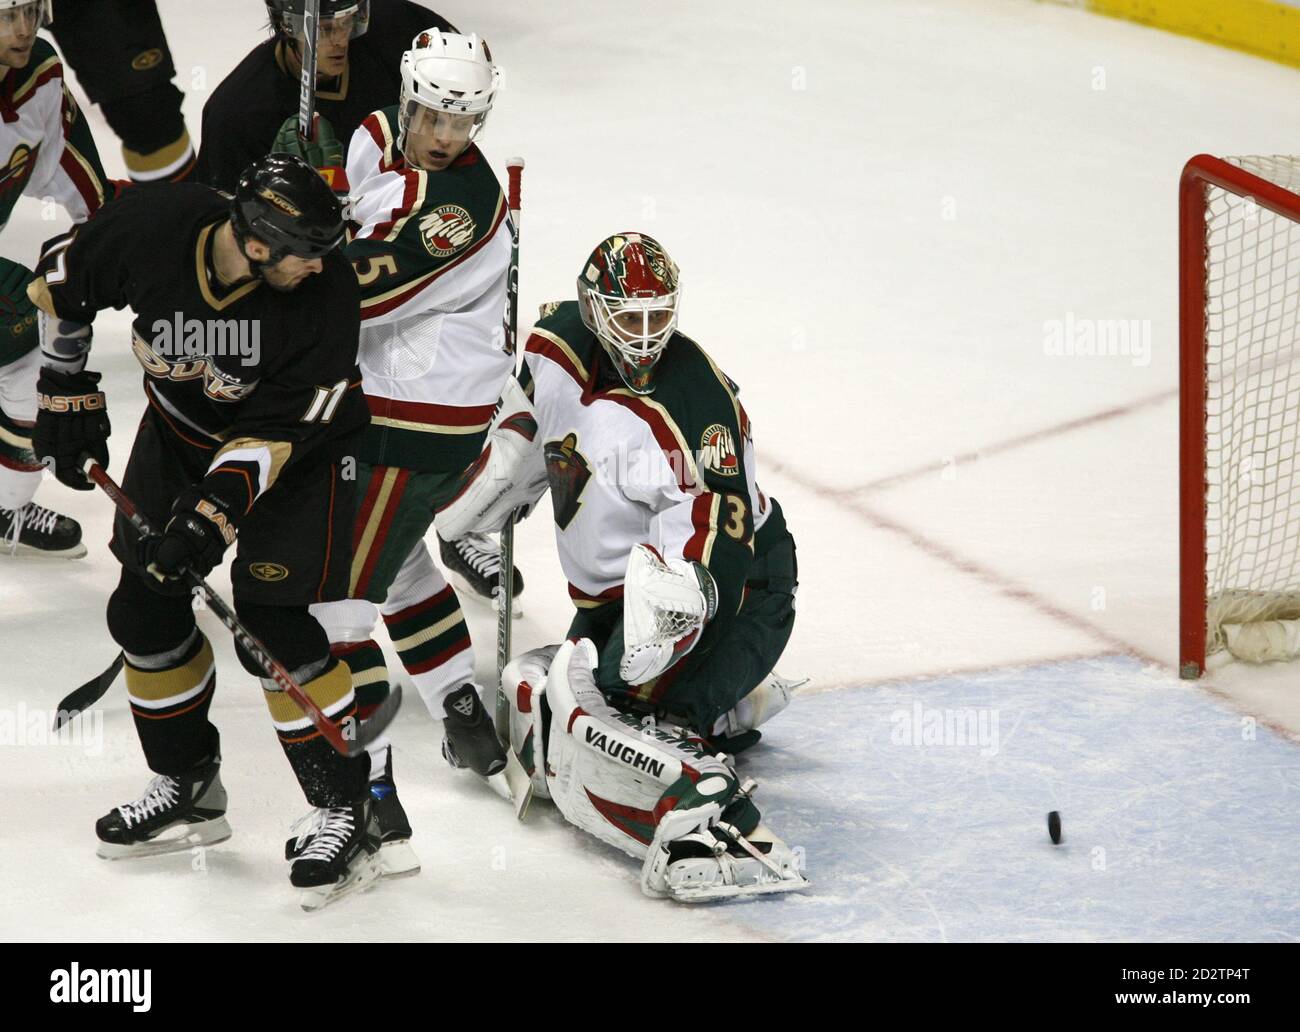 Minnesota Wild defenseman Kim Johnsson (5) and goalie Niklas Backstrom (R) look back into the net along with Anaheim Ducks Dustin Penner (17) and Teemu Selanne, as the Ducks hit the post during the first period of Game 1 of the Stanley Cup Western Conference quarterfinal in Anaheim, California April 11, 2007.  REUTERS/Mike Blake (UNITED STATES) Stock Photo